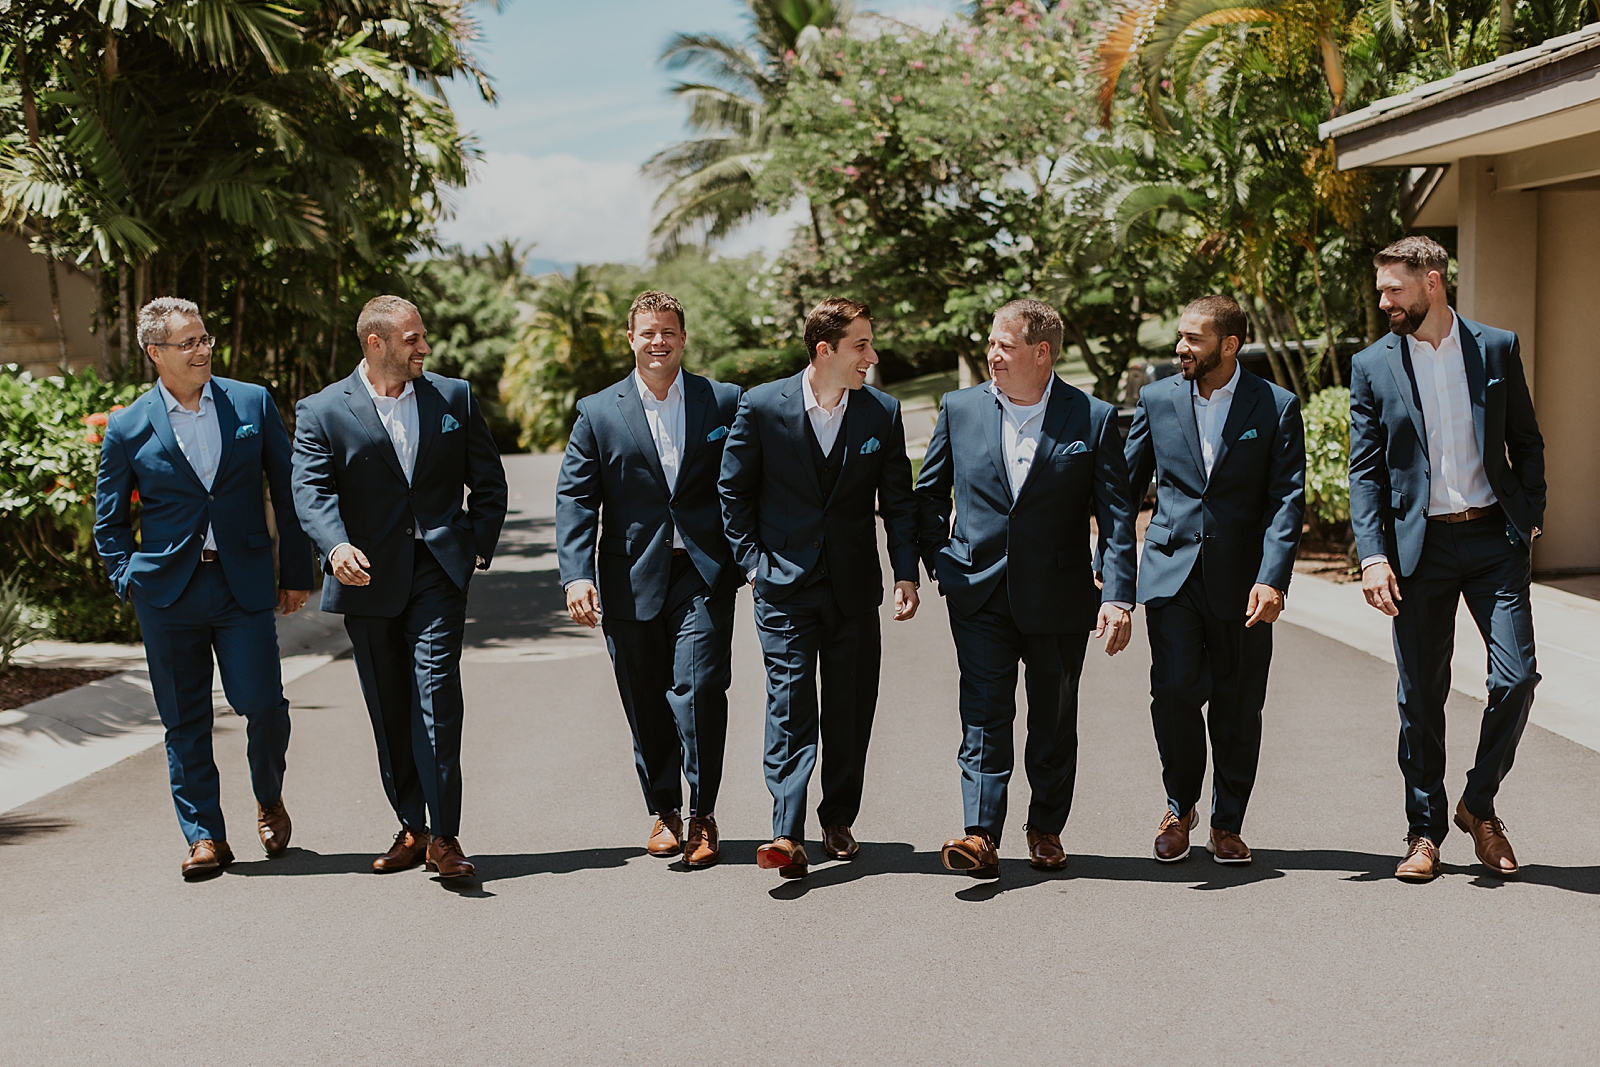 Groom and groomsmen walking casually outside together